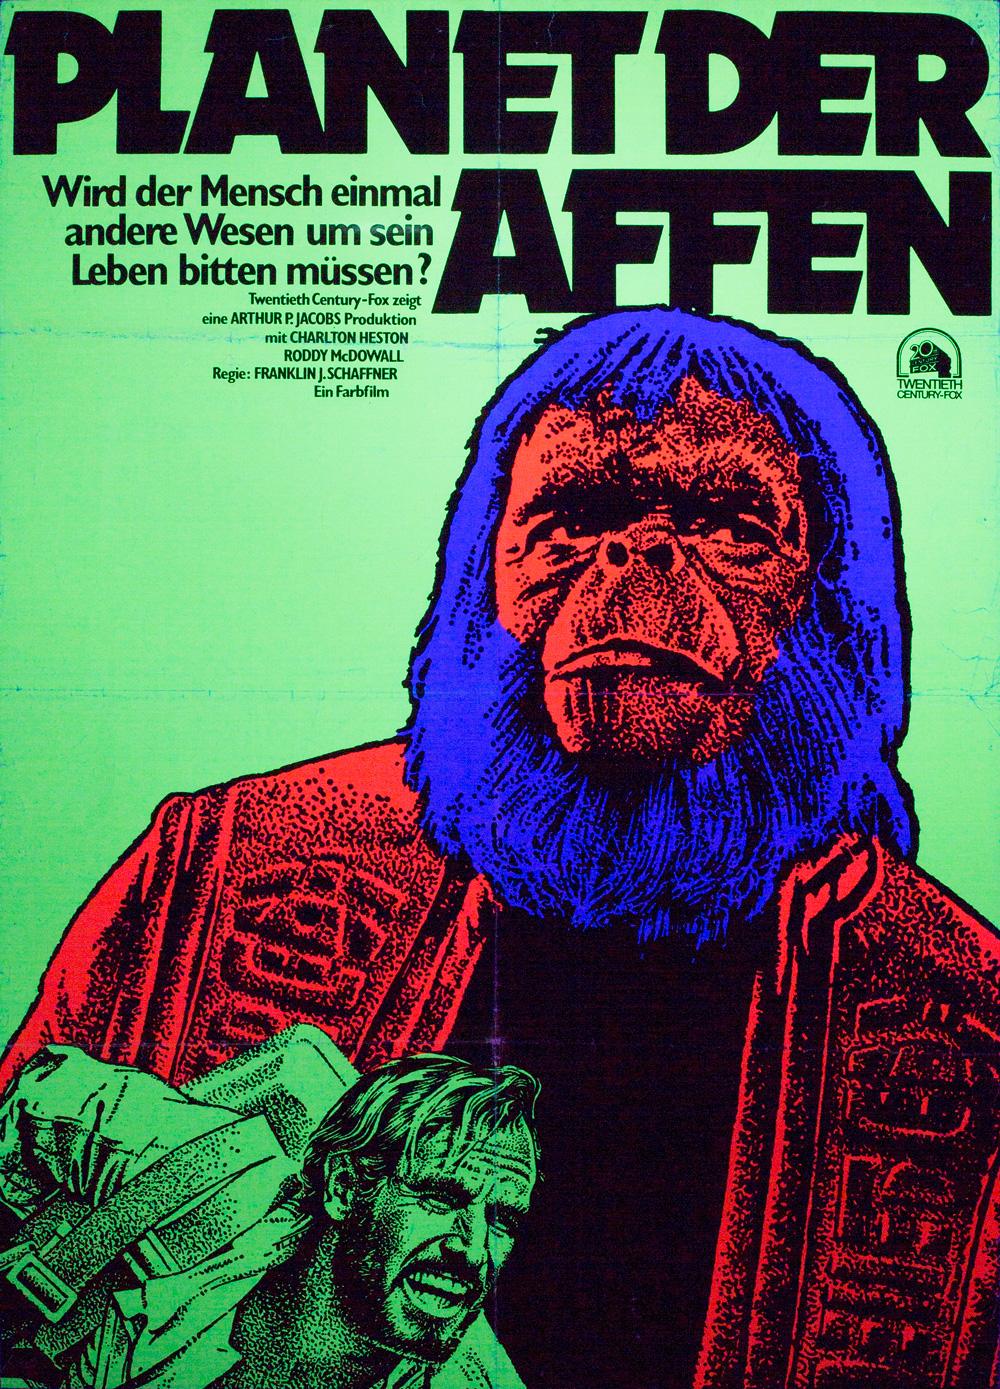 Planet of the Apes R1975 East German Film Poster 1